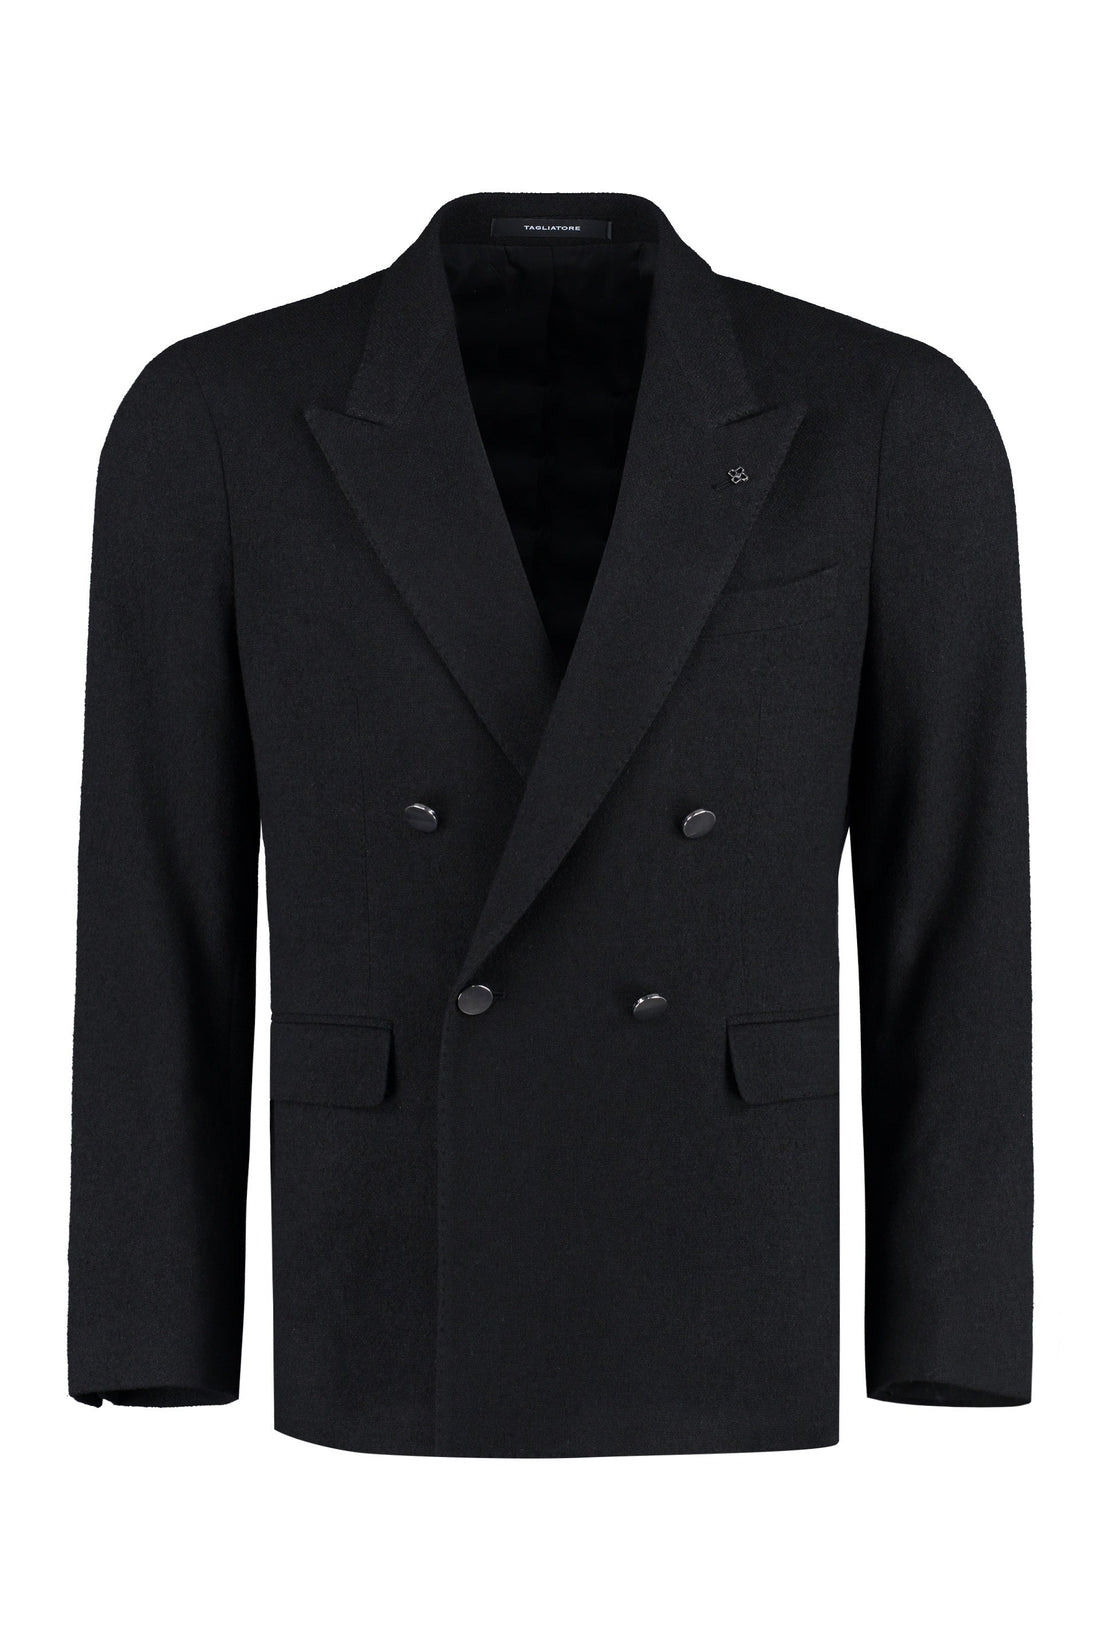 Tagliatore-OUTLET-SALE-Double-breasted wool jacket-ARCHIVIST